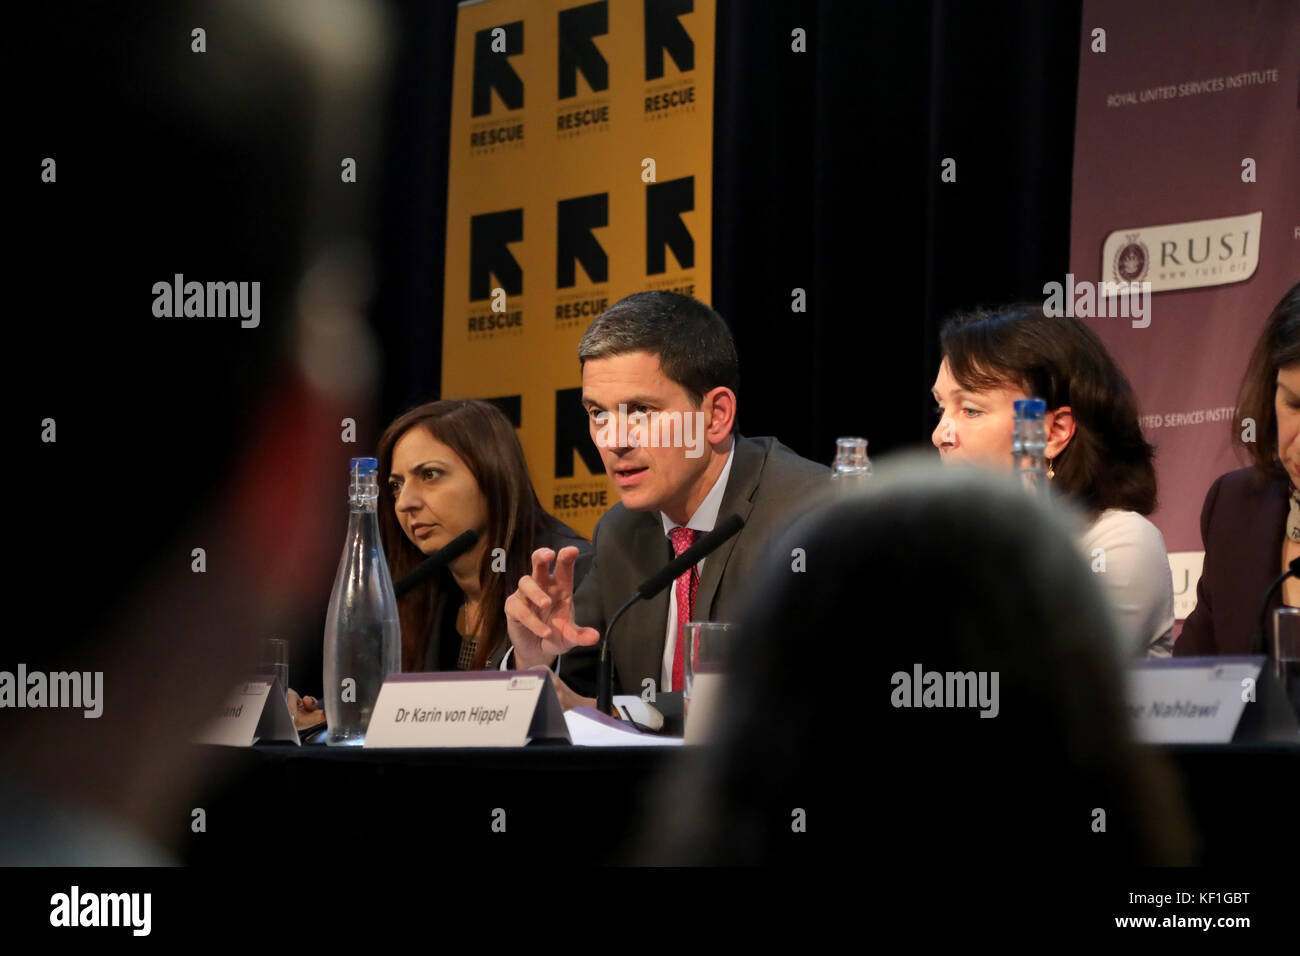 London, UK. 25th October, 2017. David Miliband, chief executive of the International Rescue Committee (IRC) and former UK foreign secretary, speaking at the RUSI think-tank in London about the Syrian conflict, on 25 October 2017. Credit: Dominic Dudley/Alamy Live News Stock Photo